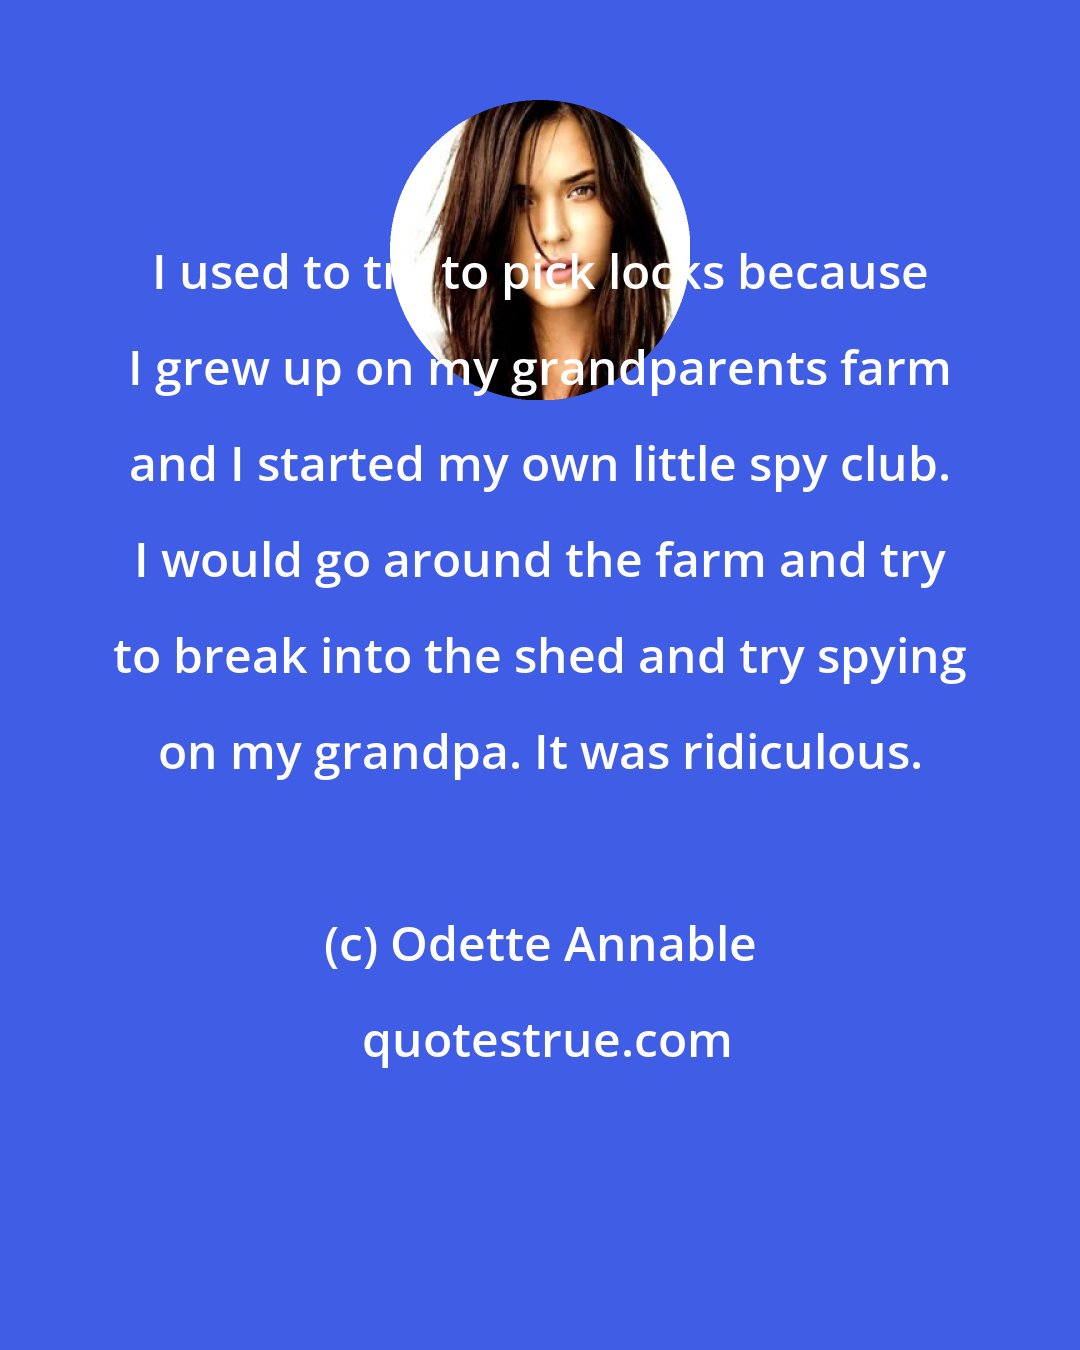 Odette Annable: I used to try to pick locks because I grew up on my grandparents farm and I started my own little spy club. I would go around the farm and try to break into the shed and try spying on my grandpa. It was ridiculous.